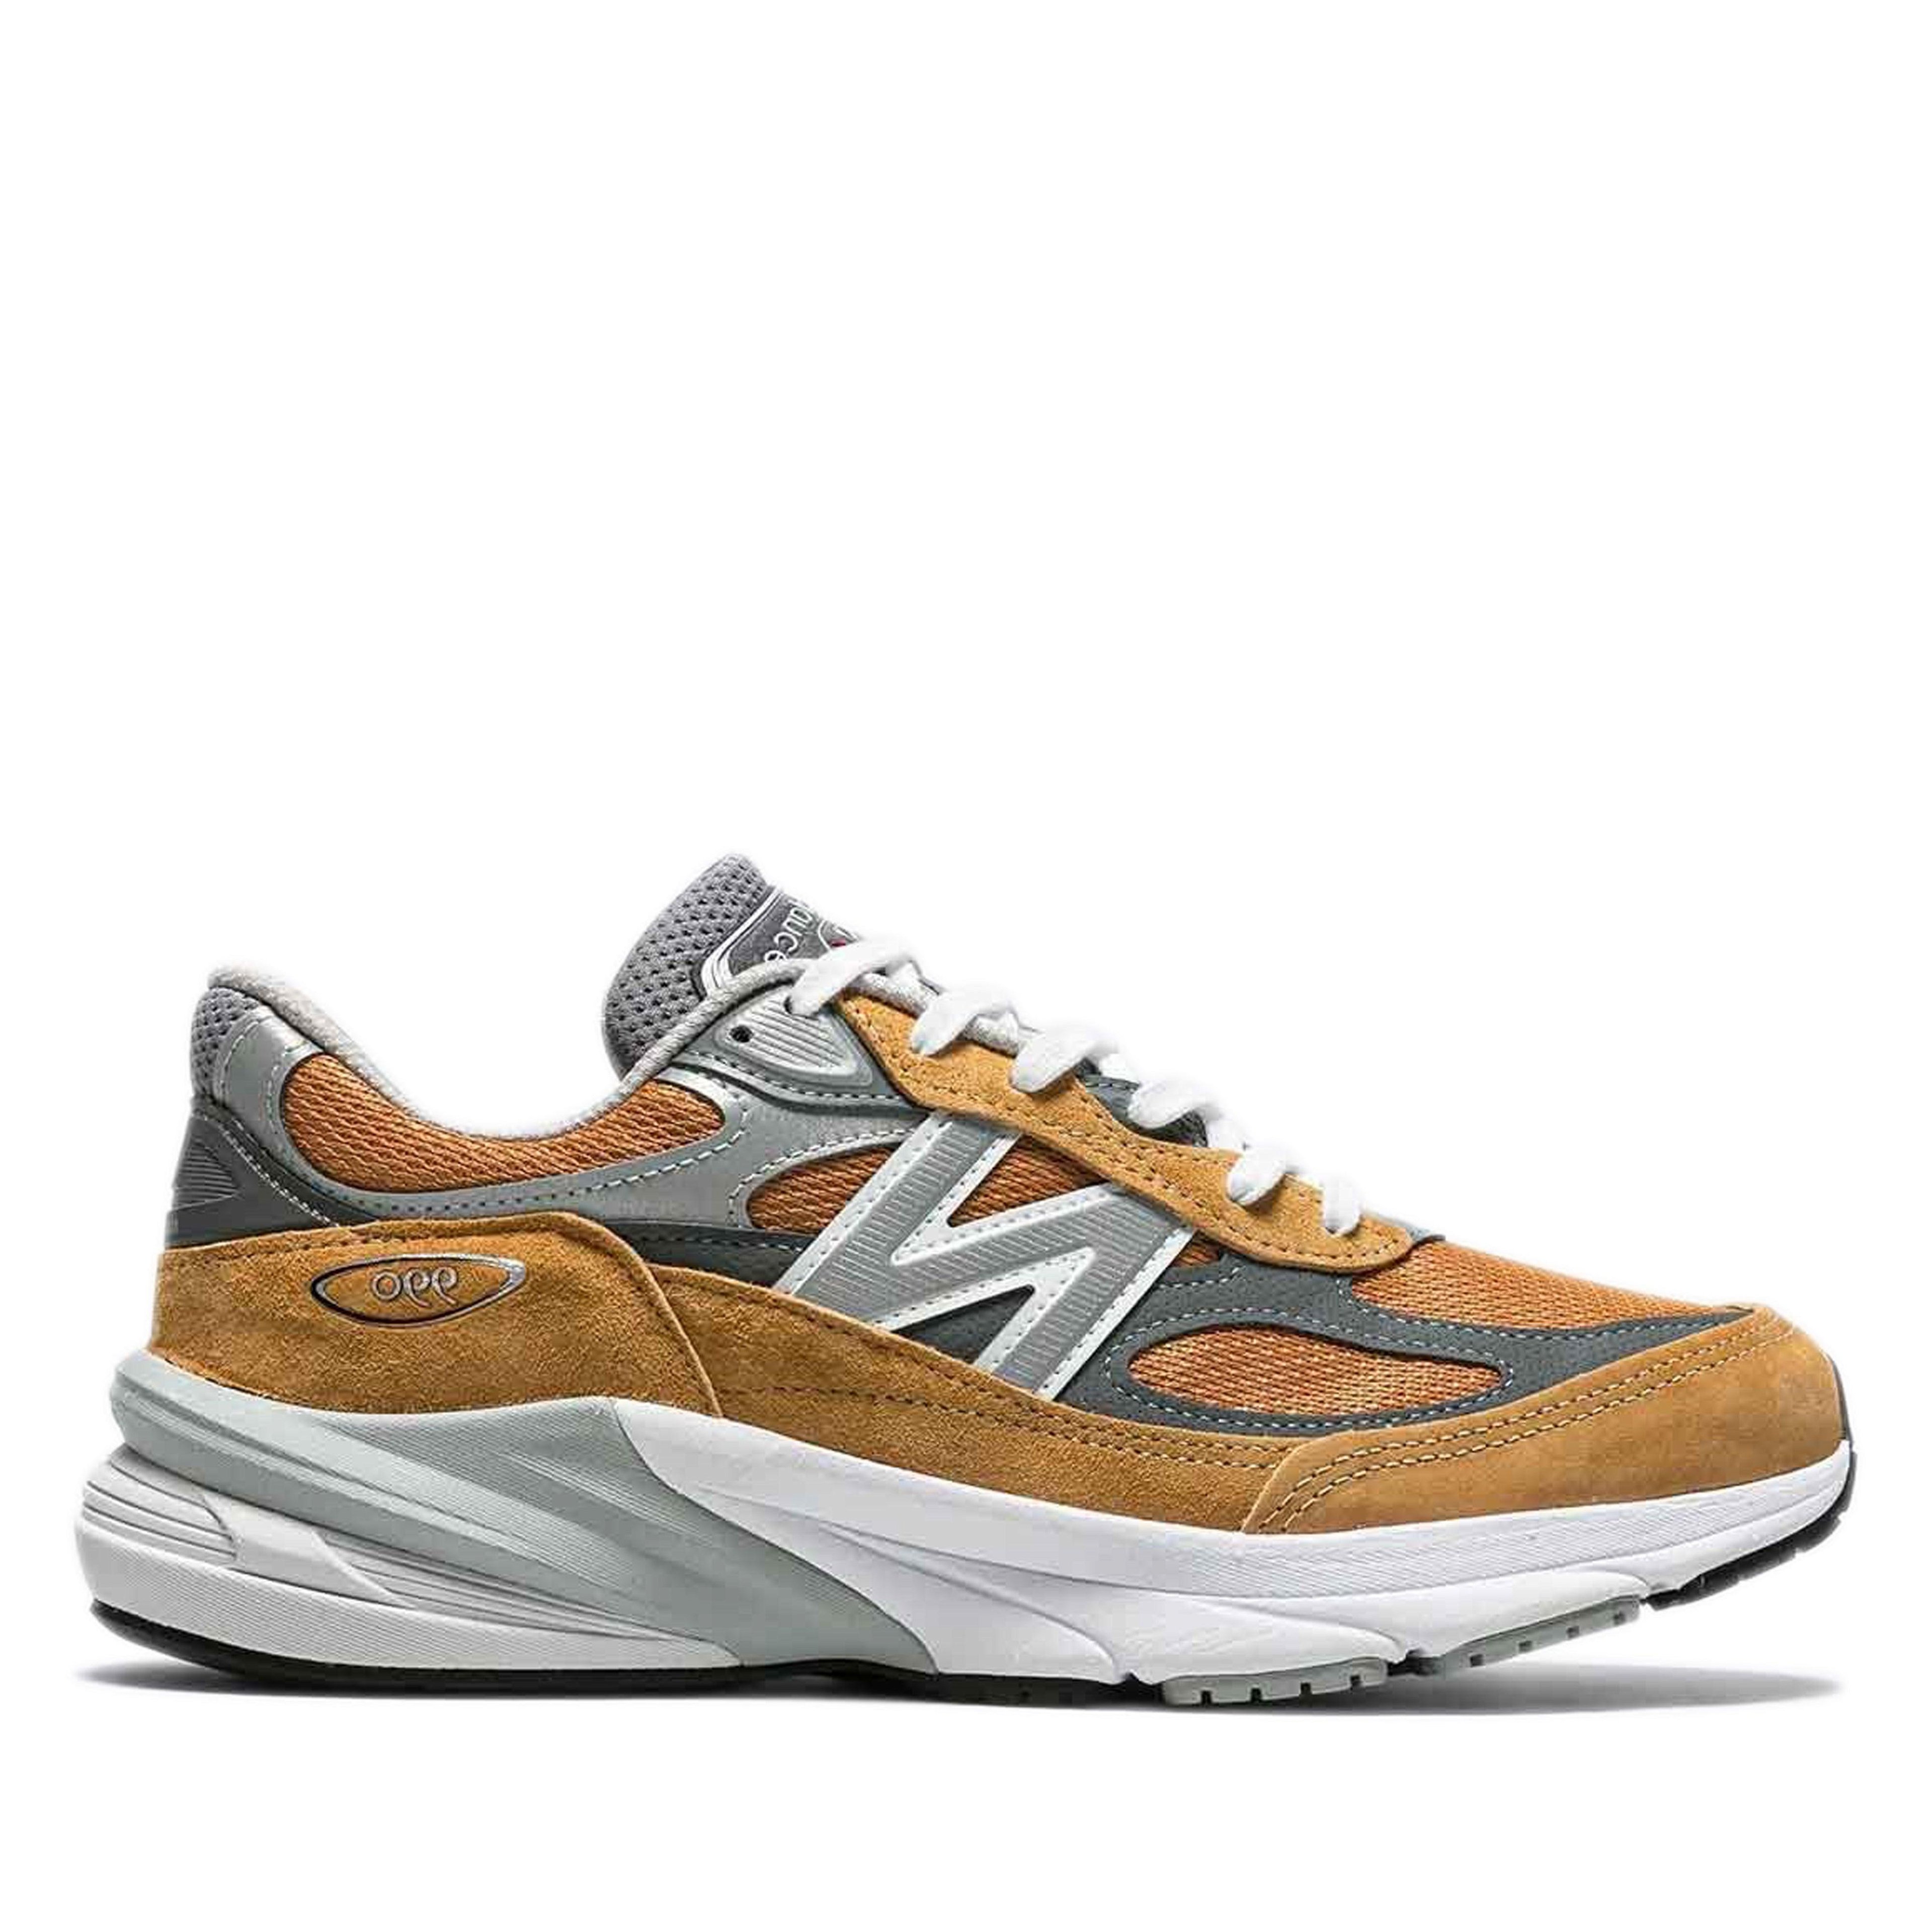 New Balance - 990V6 Sneakers - (Tan) by NEW BALANCE